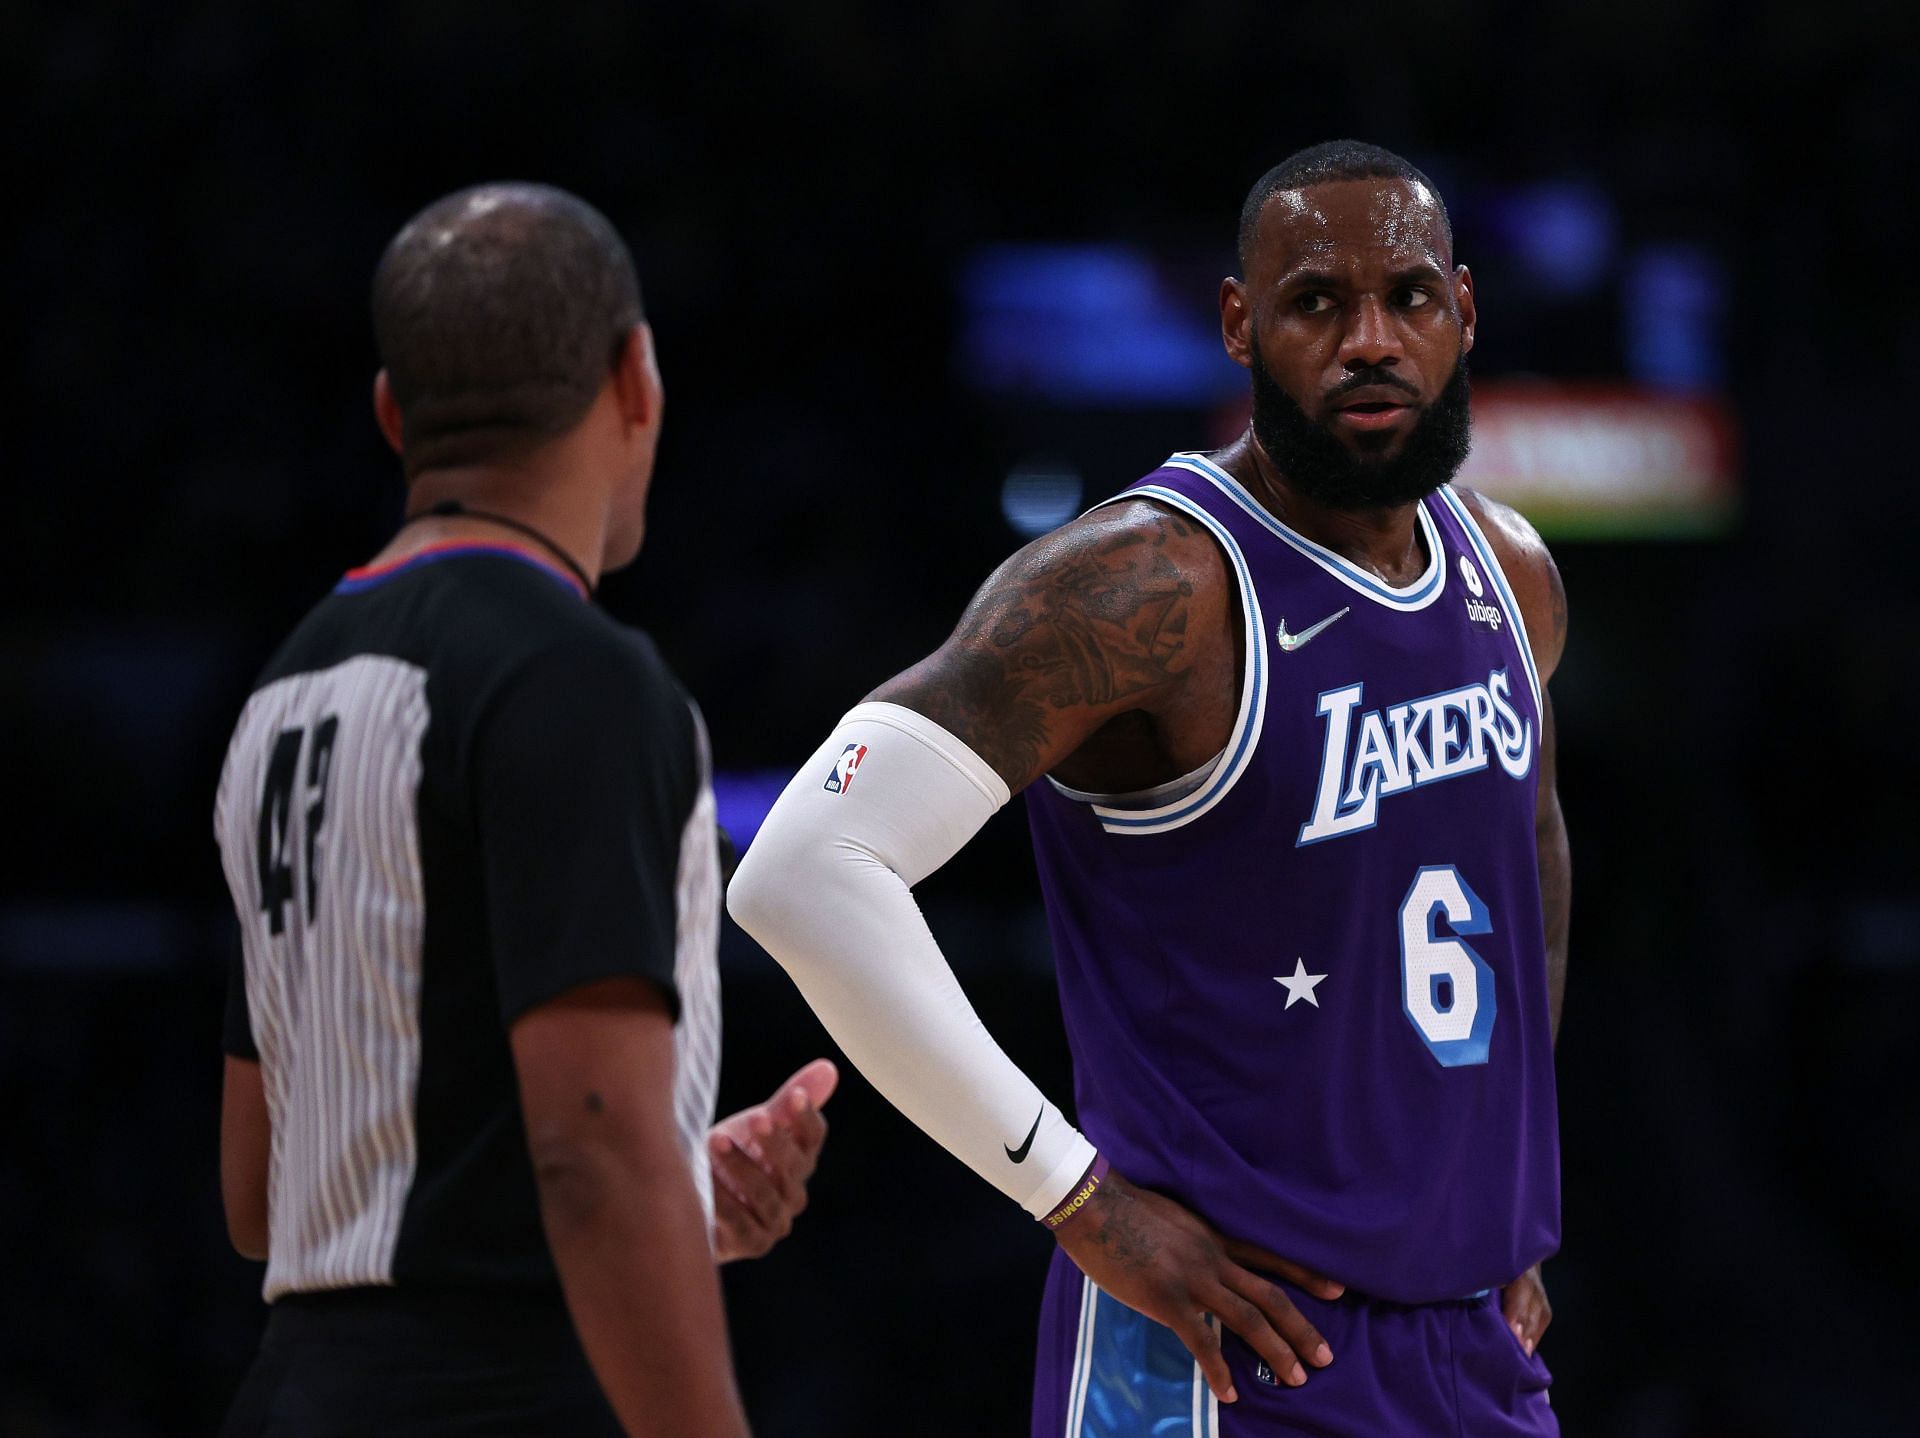 LeBron James of the LA Lakers talk with referee